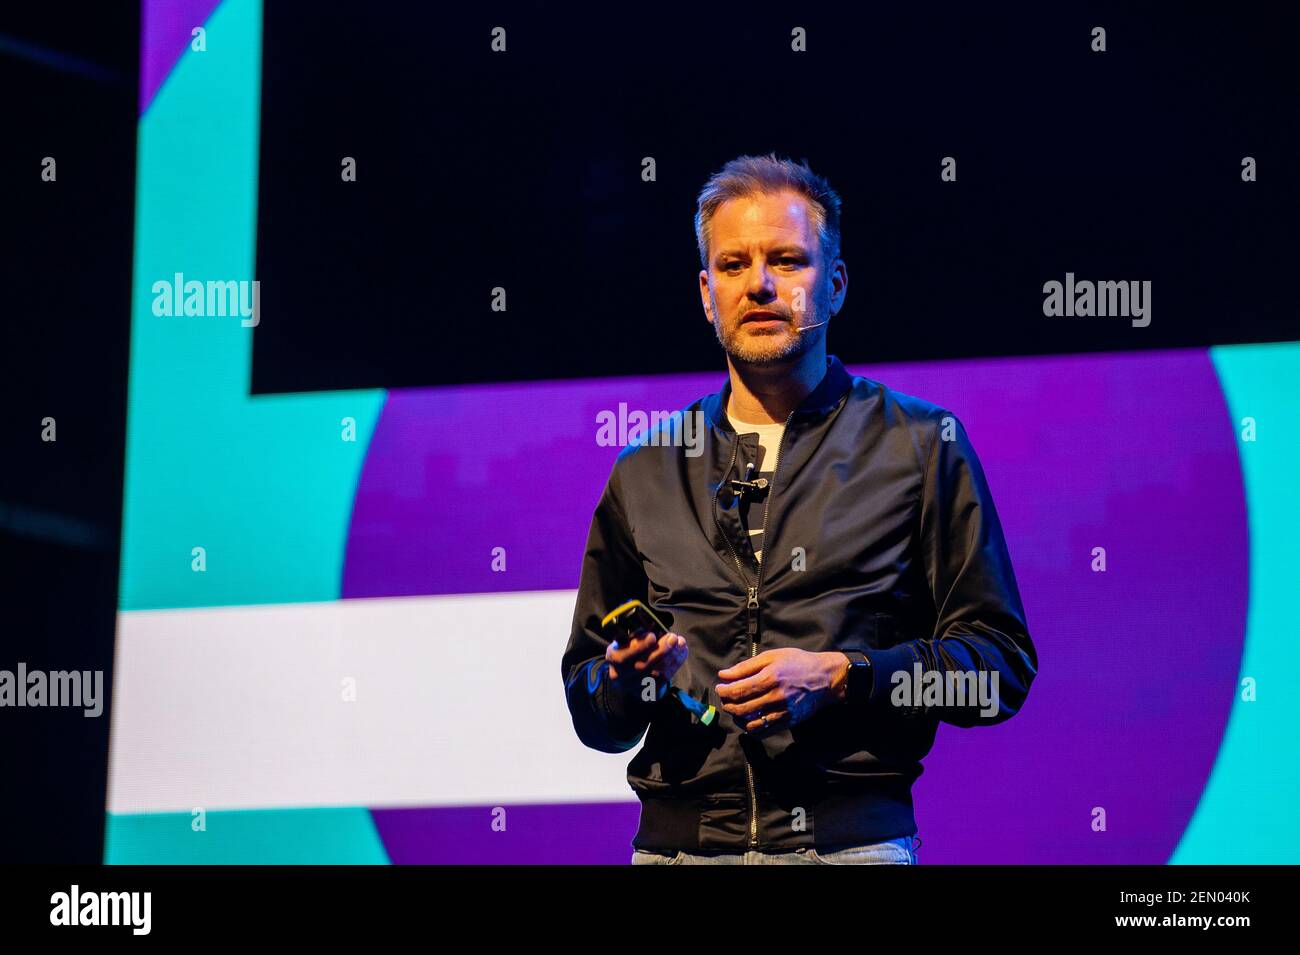 Michael Martin from Nike is giving a talk during the TNW in Amsterdam, on May 9th, 2019. The 14th of the TNW conference was inaugurated in Amsterdam at the NDSM,